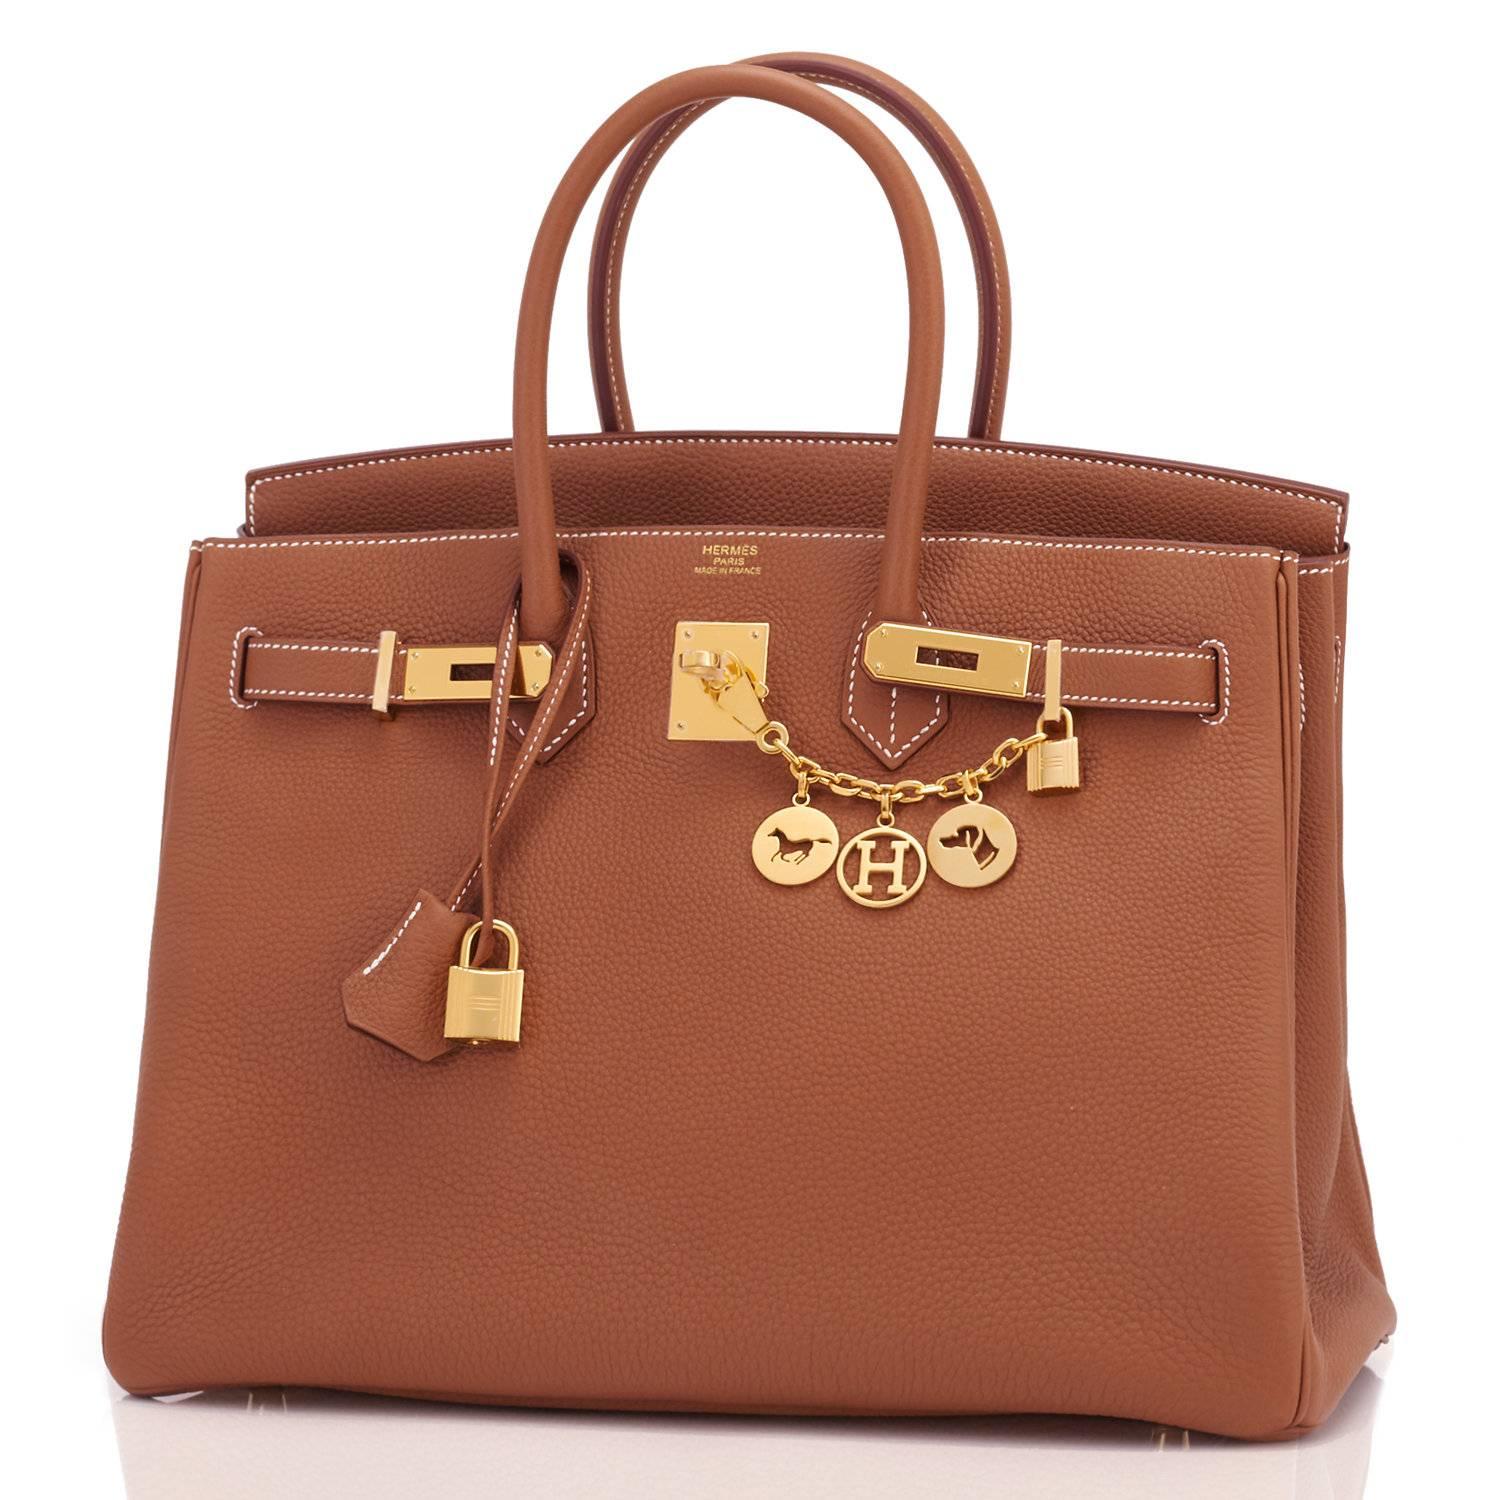 Hermes Gold Togo Camel Tan 35cm Birkin Gold Hardware 
Brand New in Box. Store Fresh. Pristine Condition (with plastic on hardware). 
Perfect gift! Comes with lock, keys, clochette, sleeper, raincoat, and Hermes box.
Gold is a gorgeous camel tan,